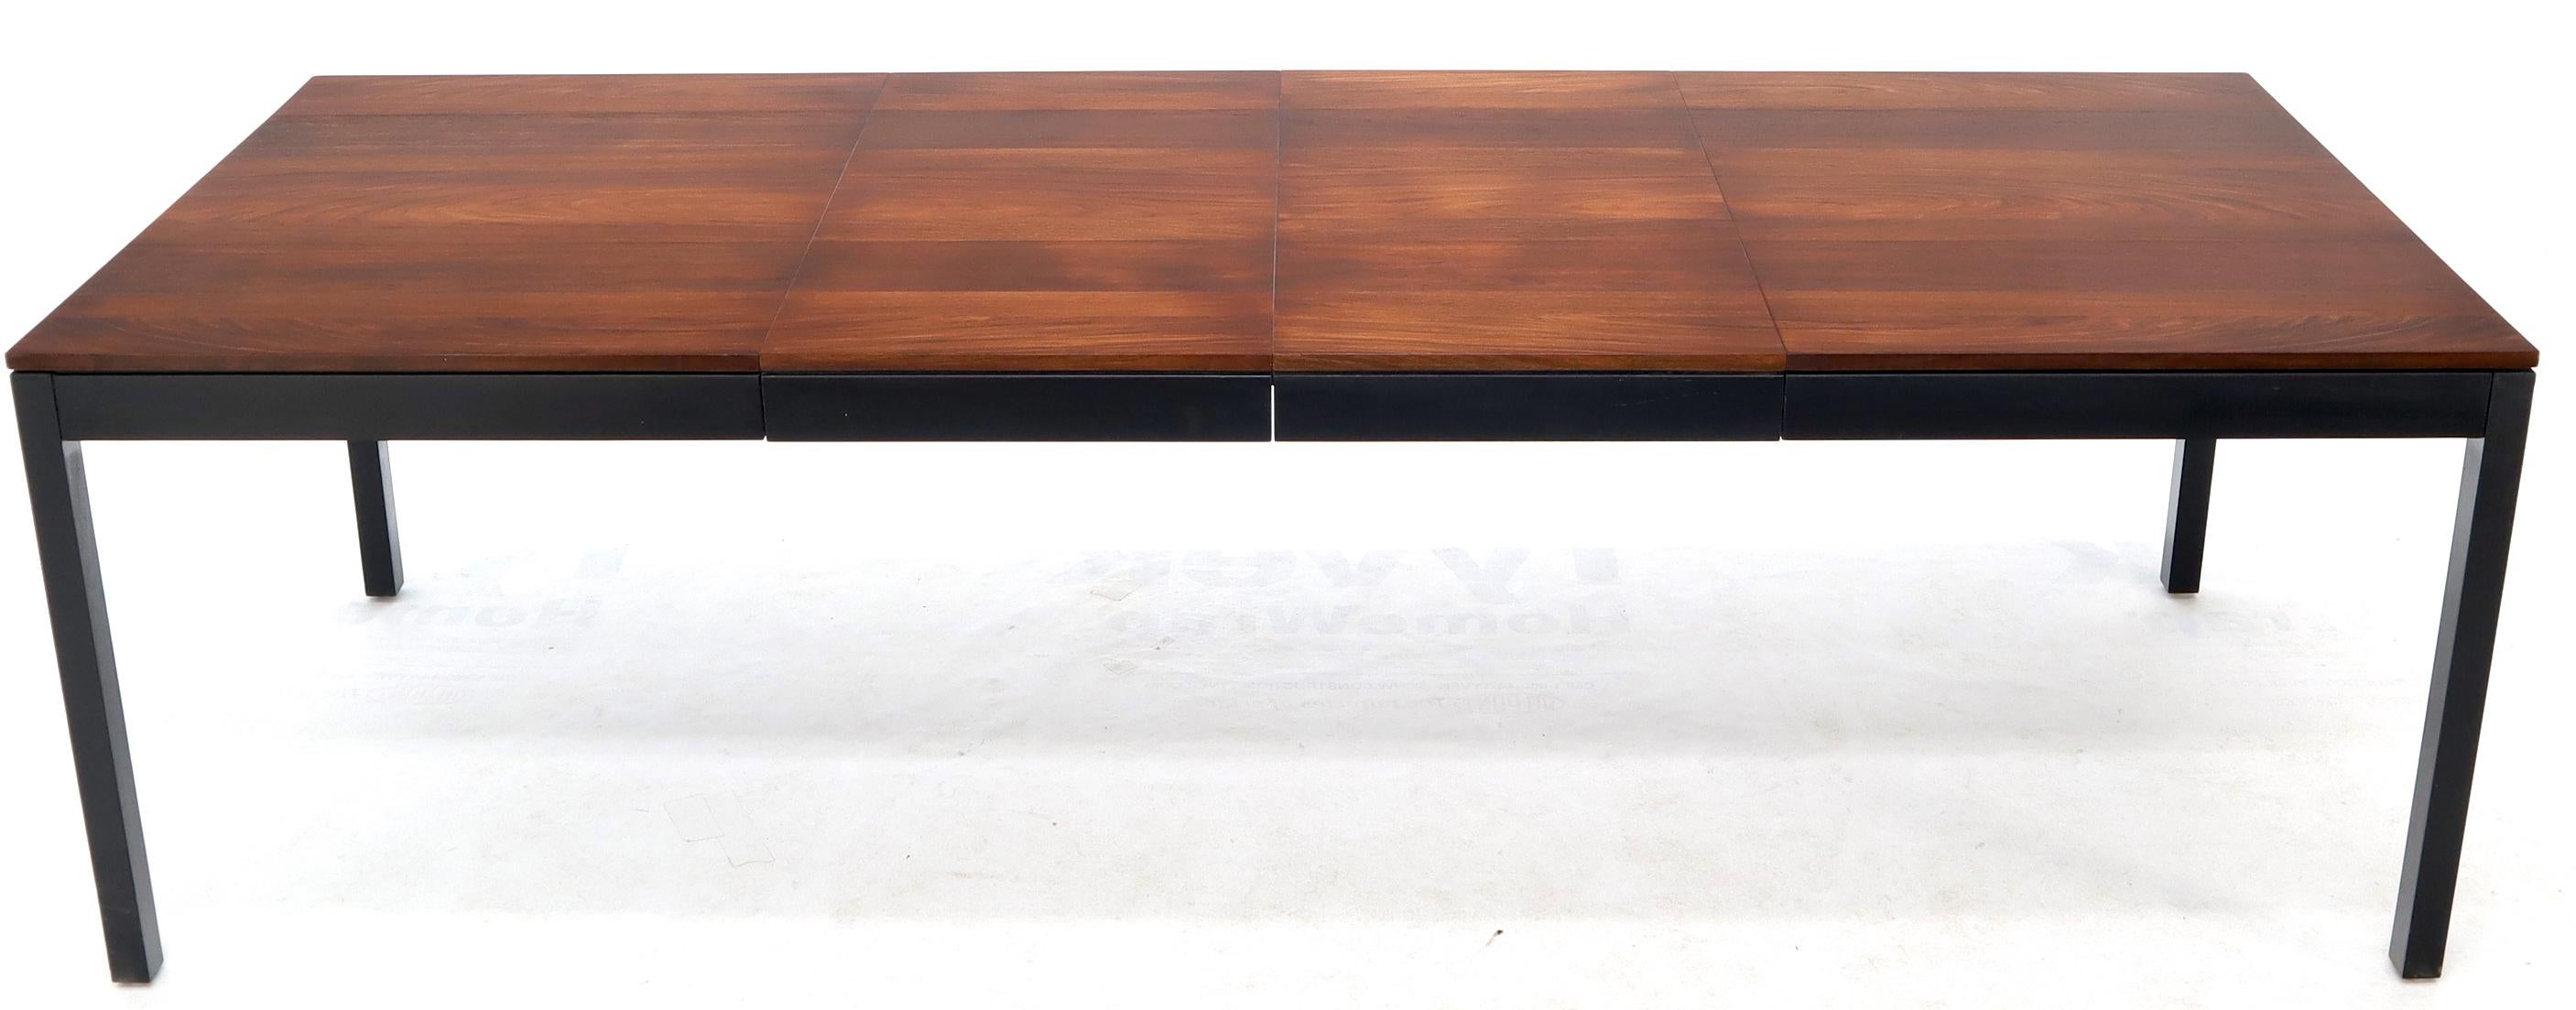 Mid-Century Modern Mixed Woods Top Dining Table with 2 Leaves 5